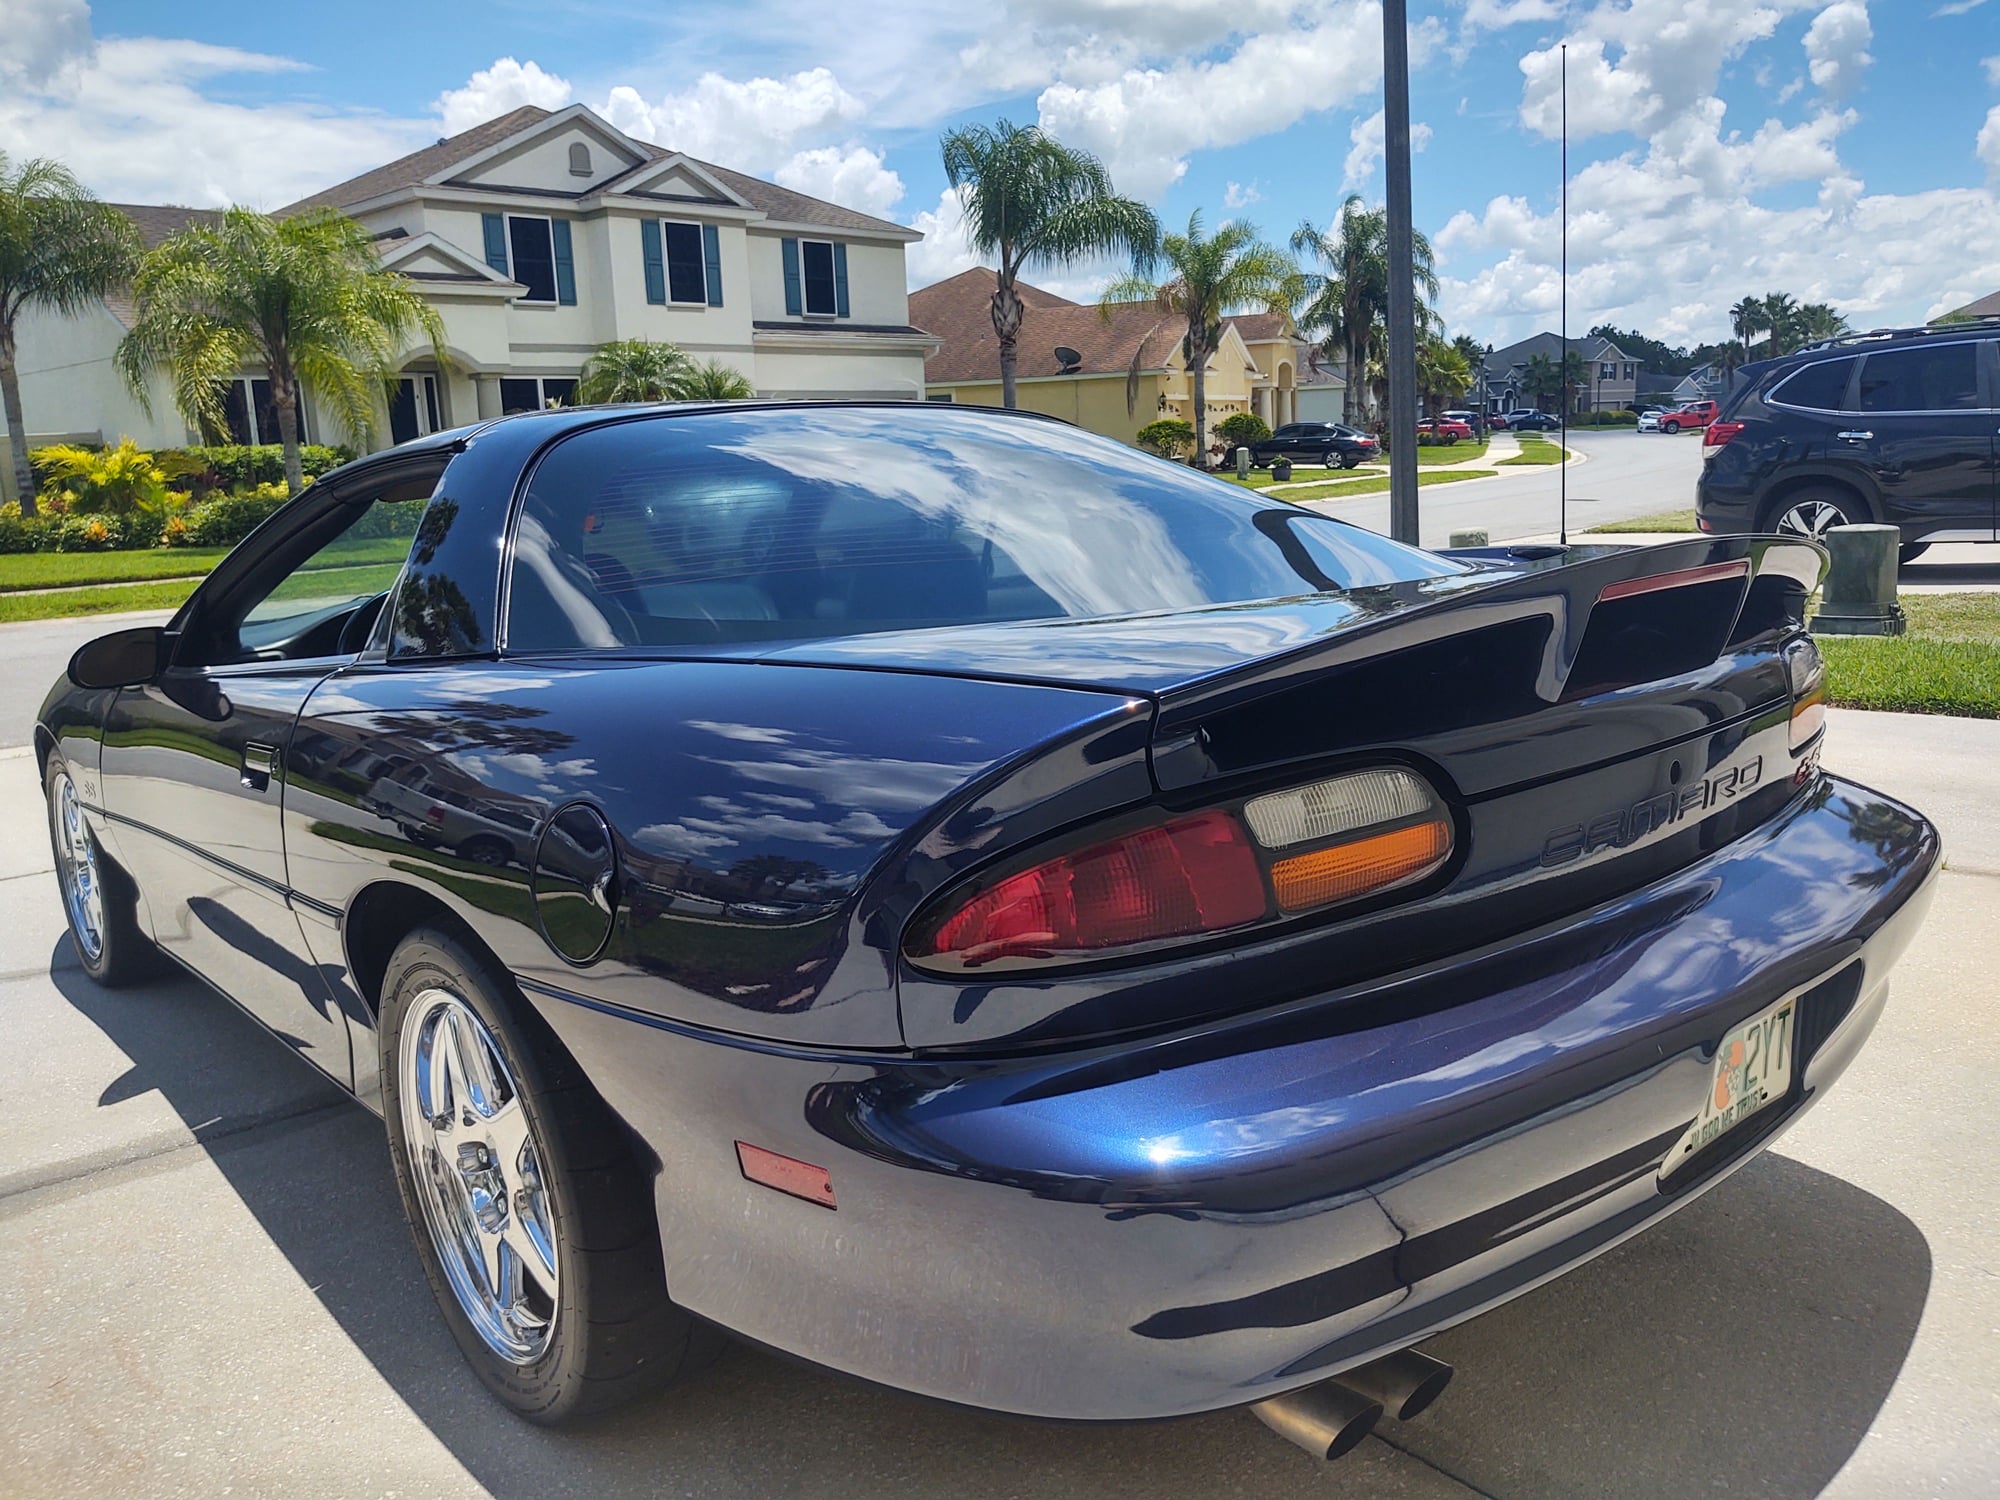 1999 Chevrolet Camaro - Built 1999 Camaro SS 6-speed - Used - VIN 2G1FP22G9X2134843 - 58,000 Miles - 8 cyl - 2WD - Manual - Coupe - Blue - Lakeland, FL 33805, United States